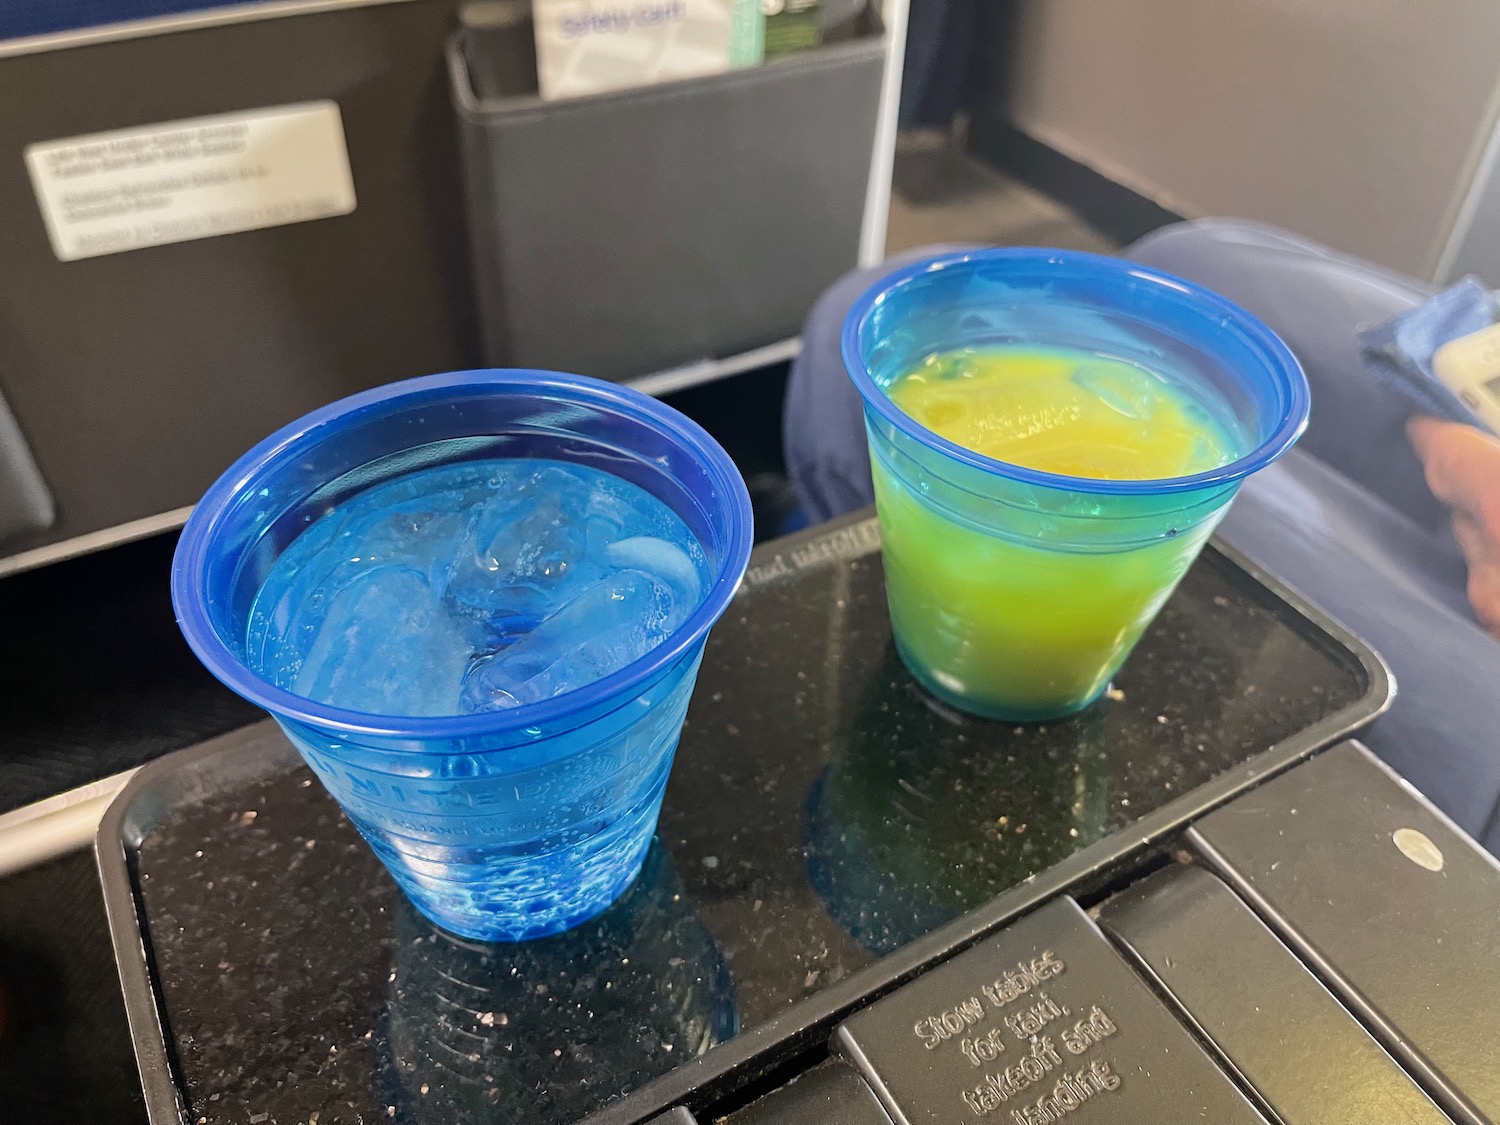 two cups of liquid on a tray